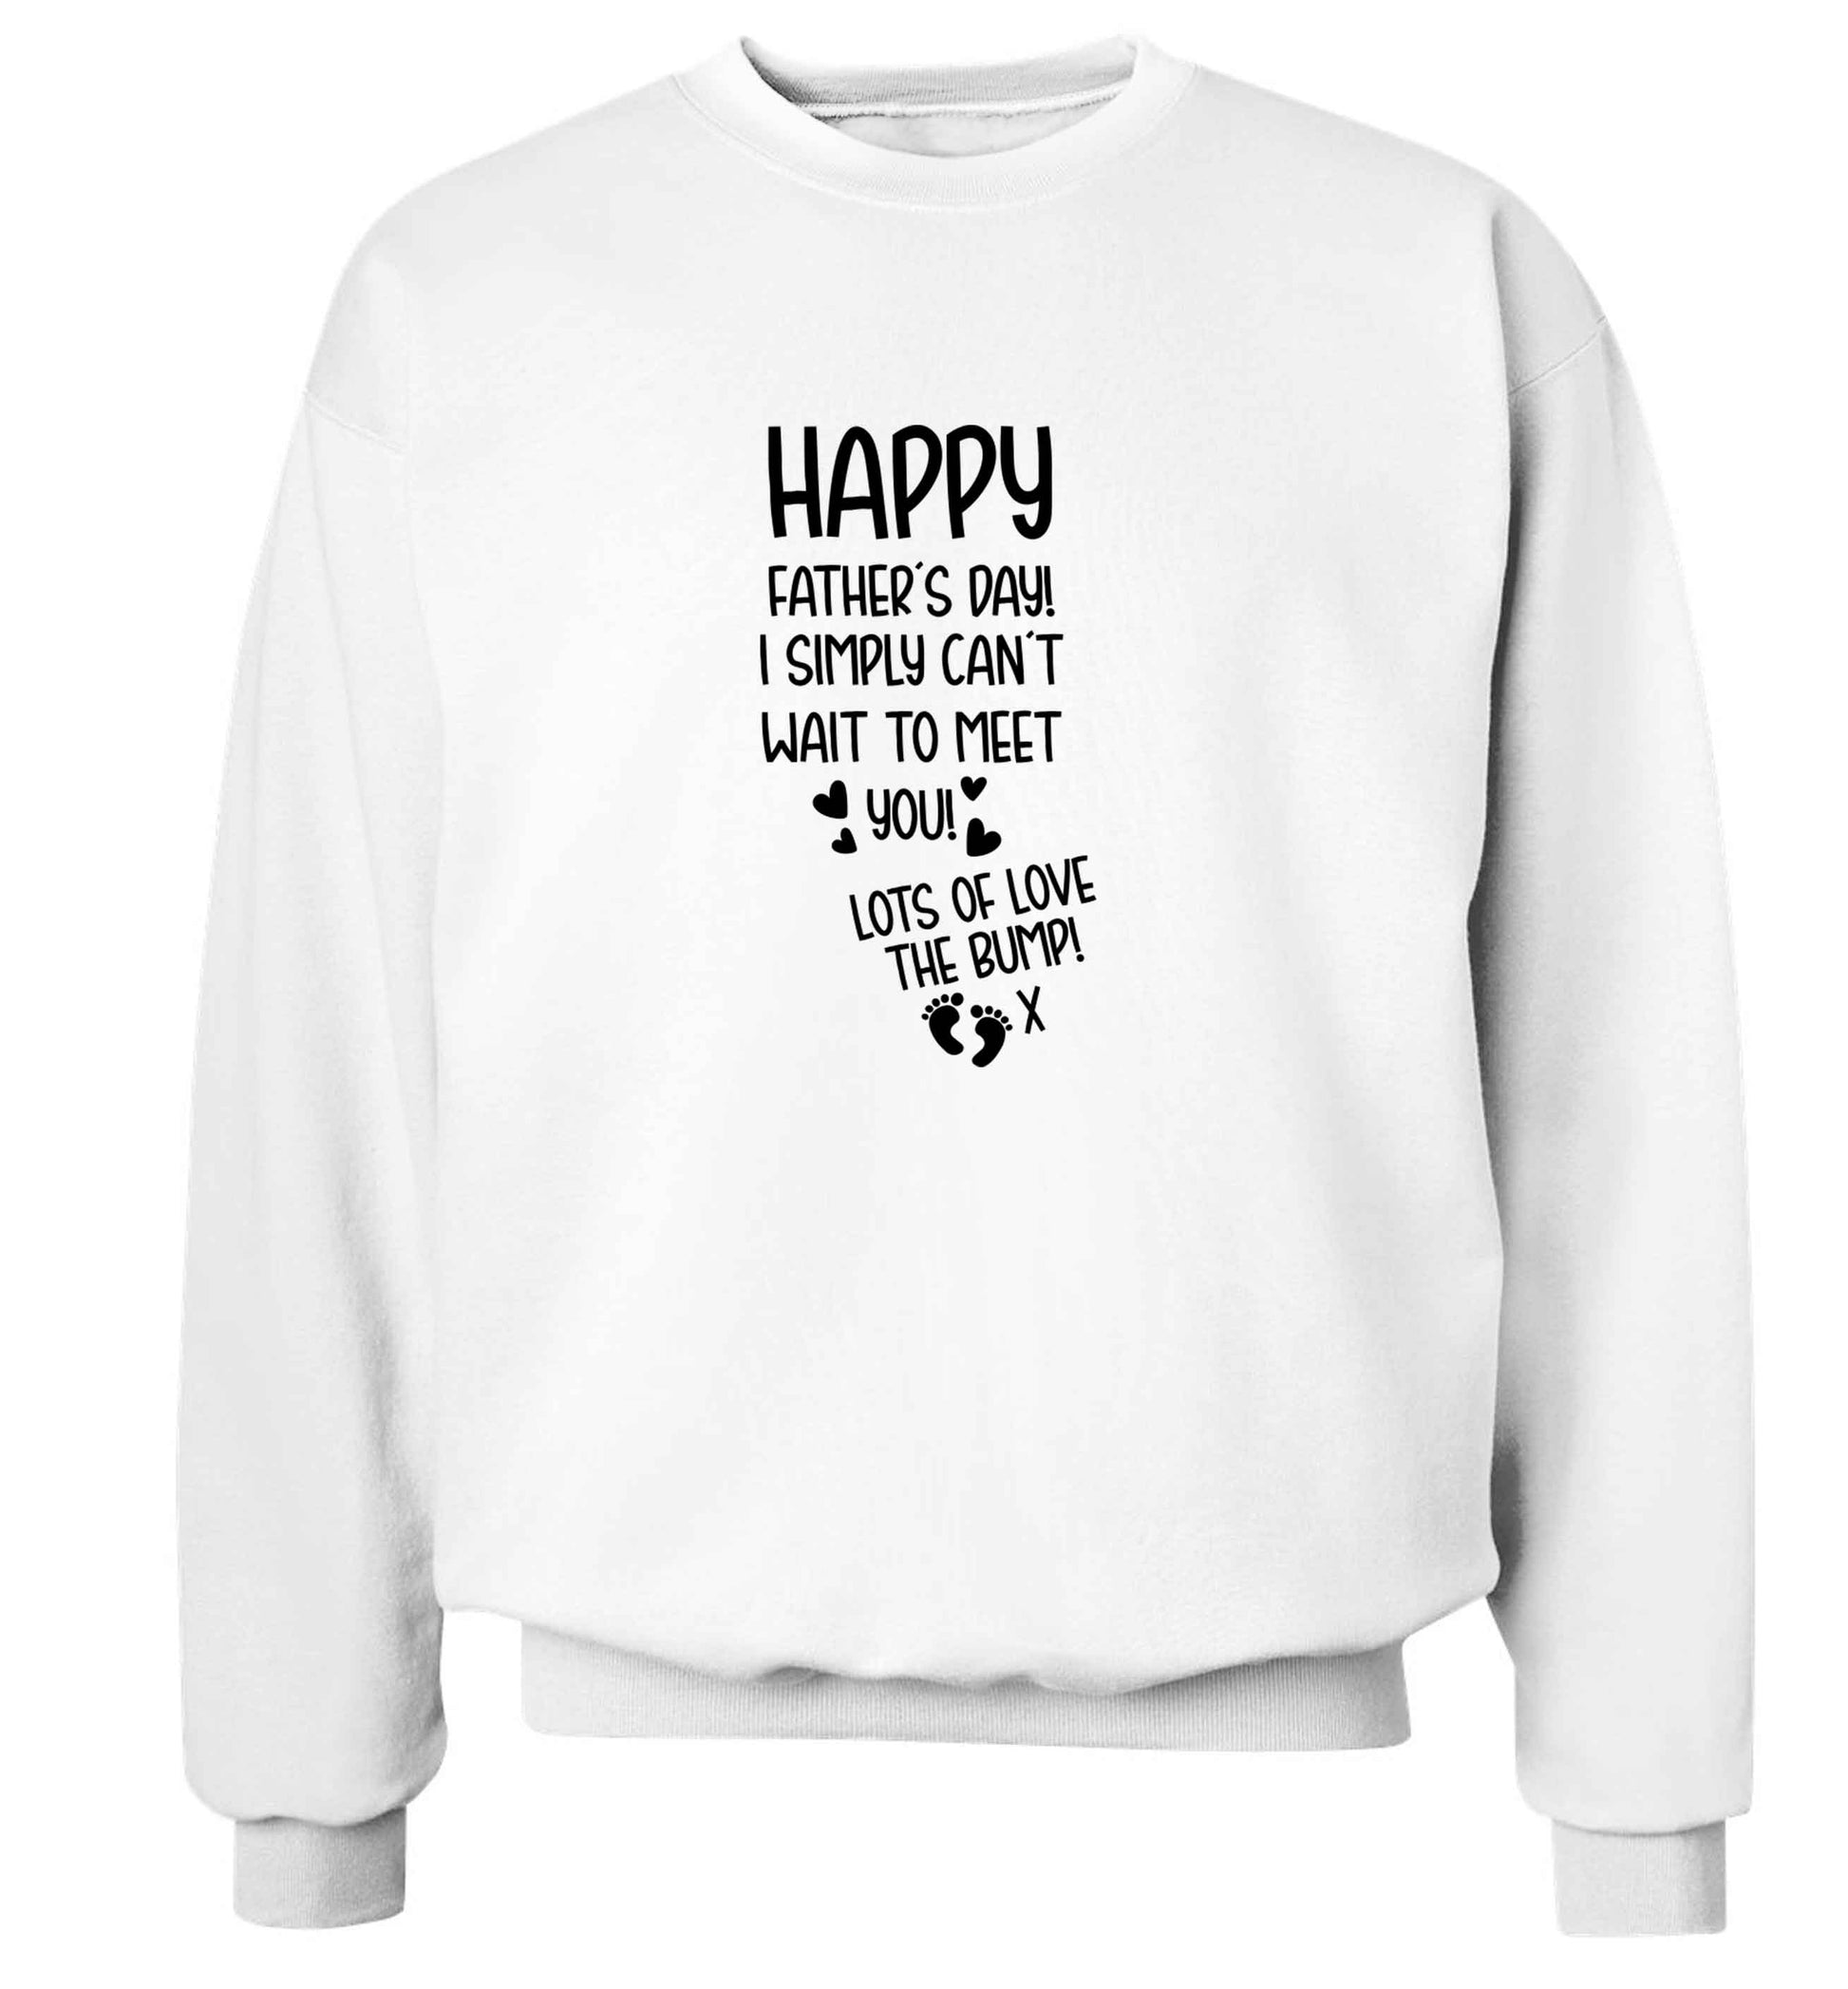 Happy Father's day daddy I can't wait to meet you lot's of love the bump! adult's unisex white sweater 2XL